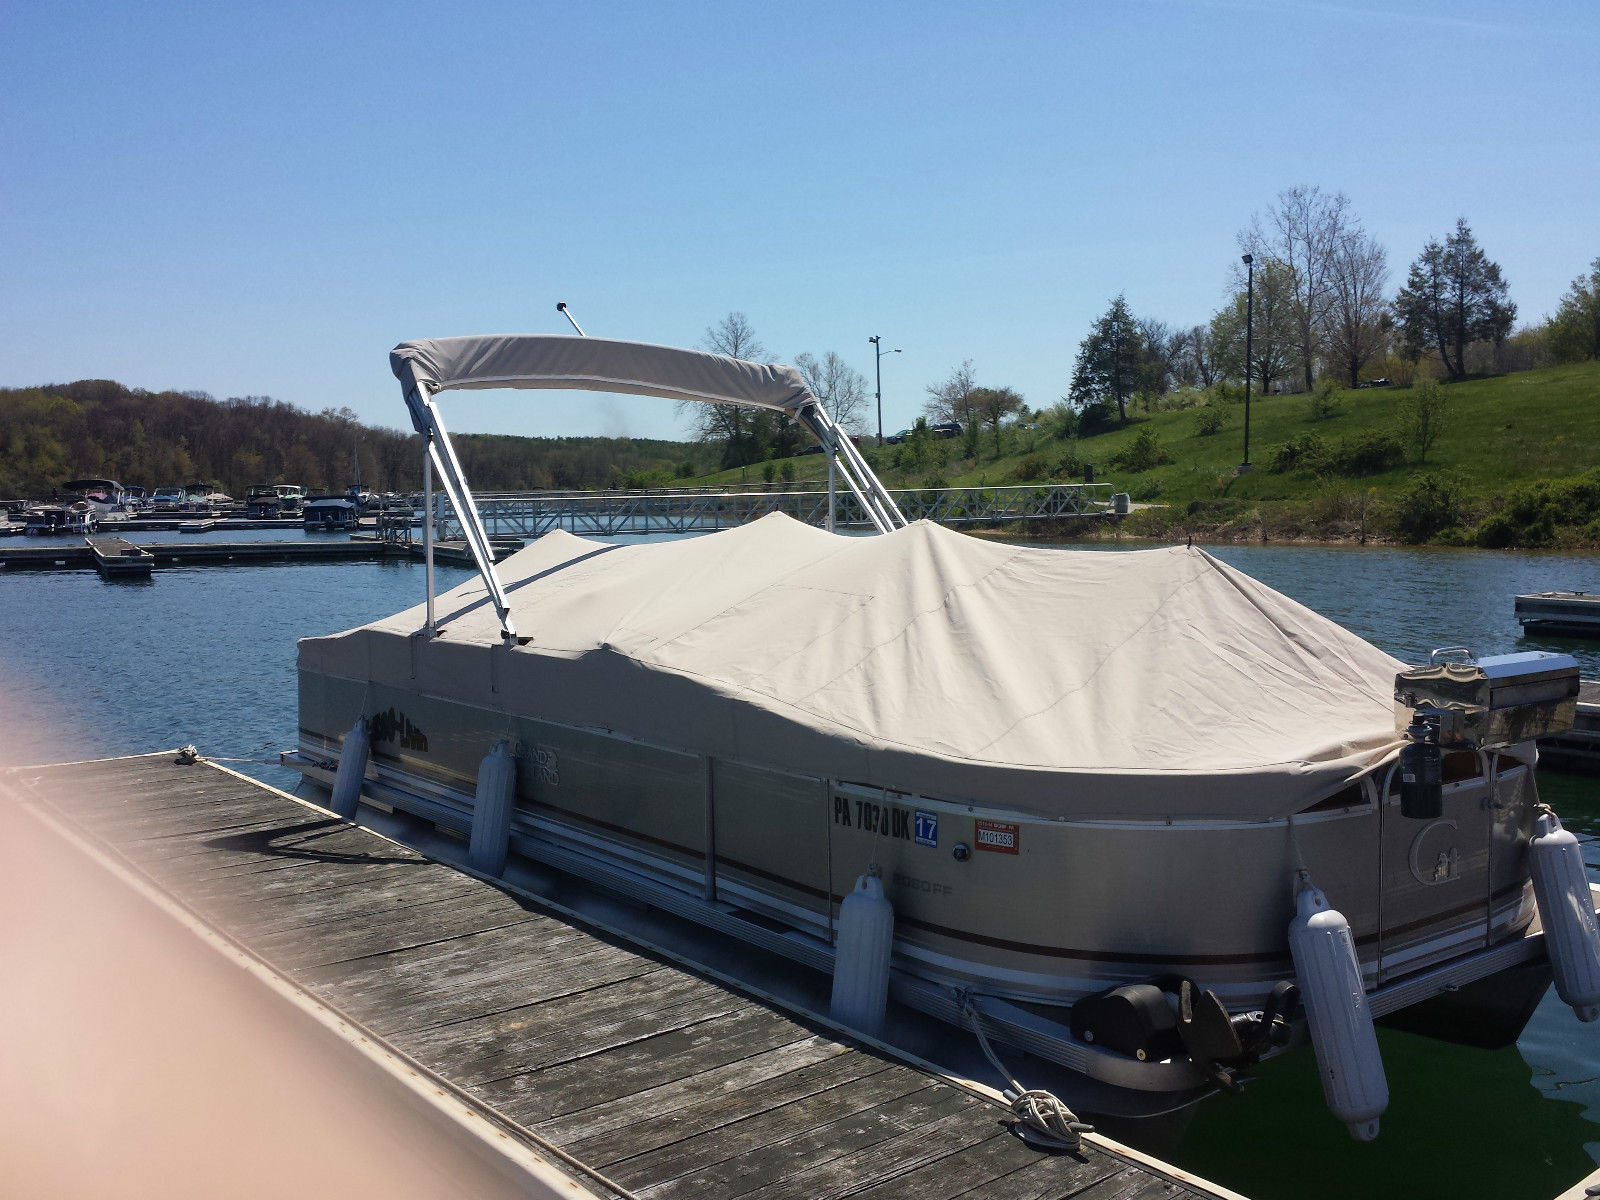 GRAND ISLAND PONTOON BOAT 2013 for sale for $21,995 